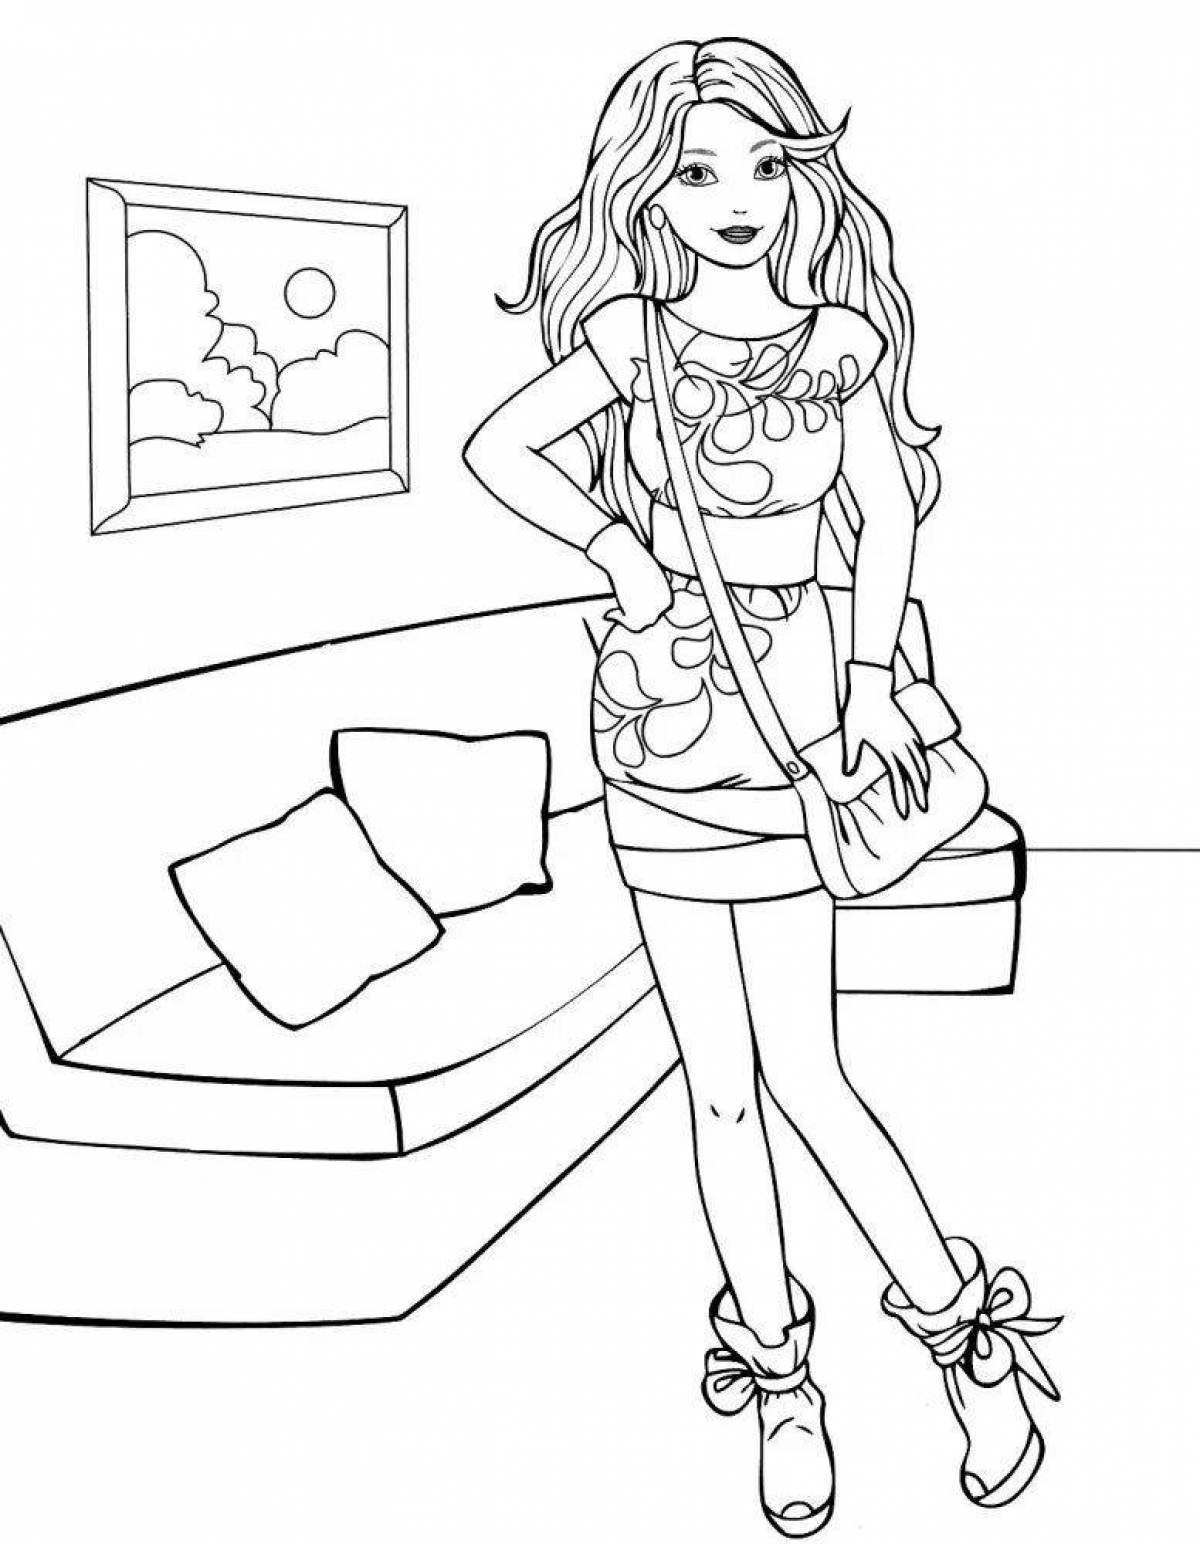 Animated barbie coloring page